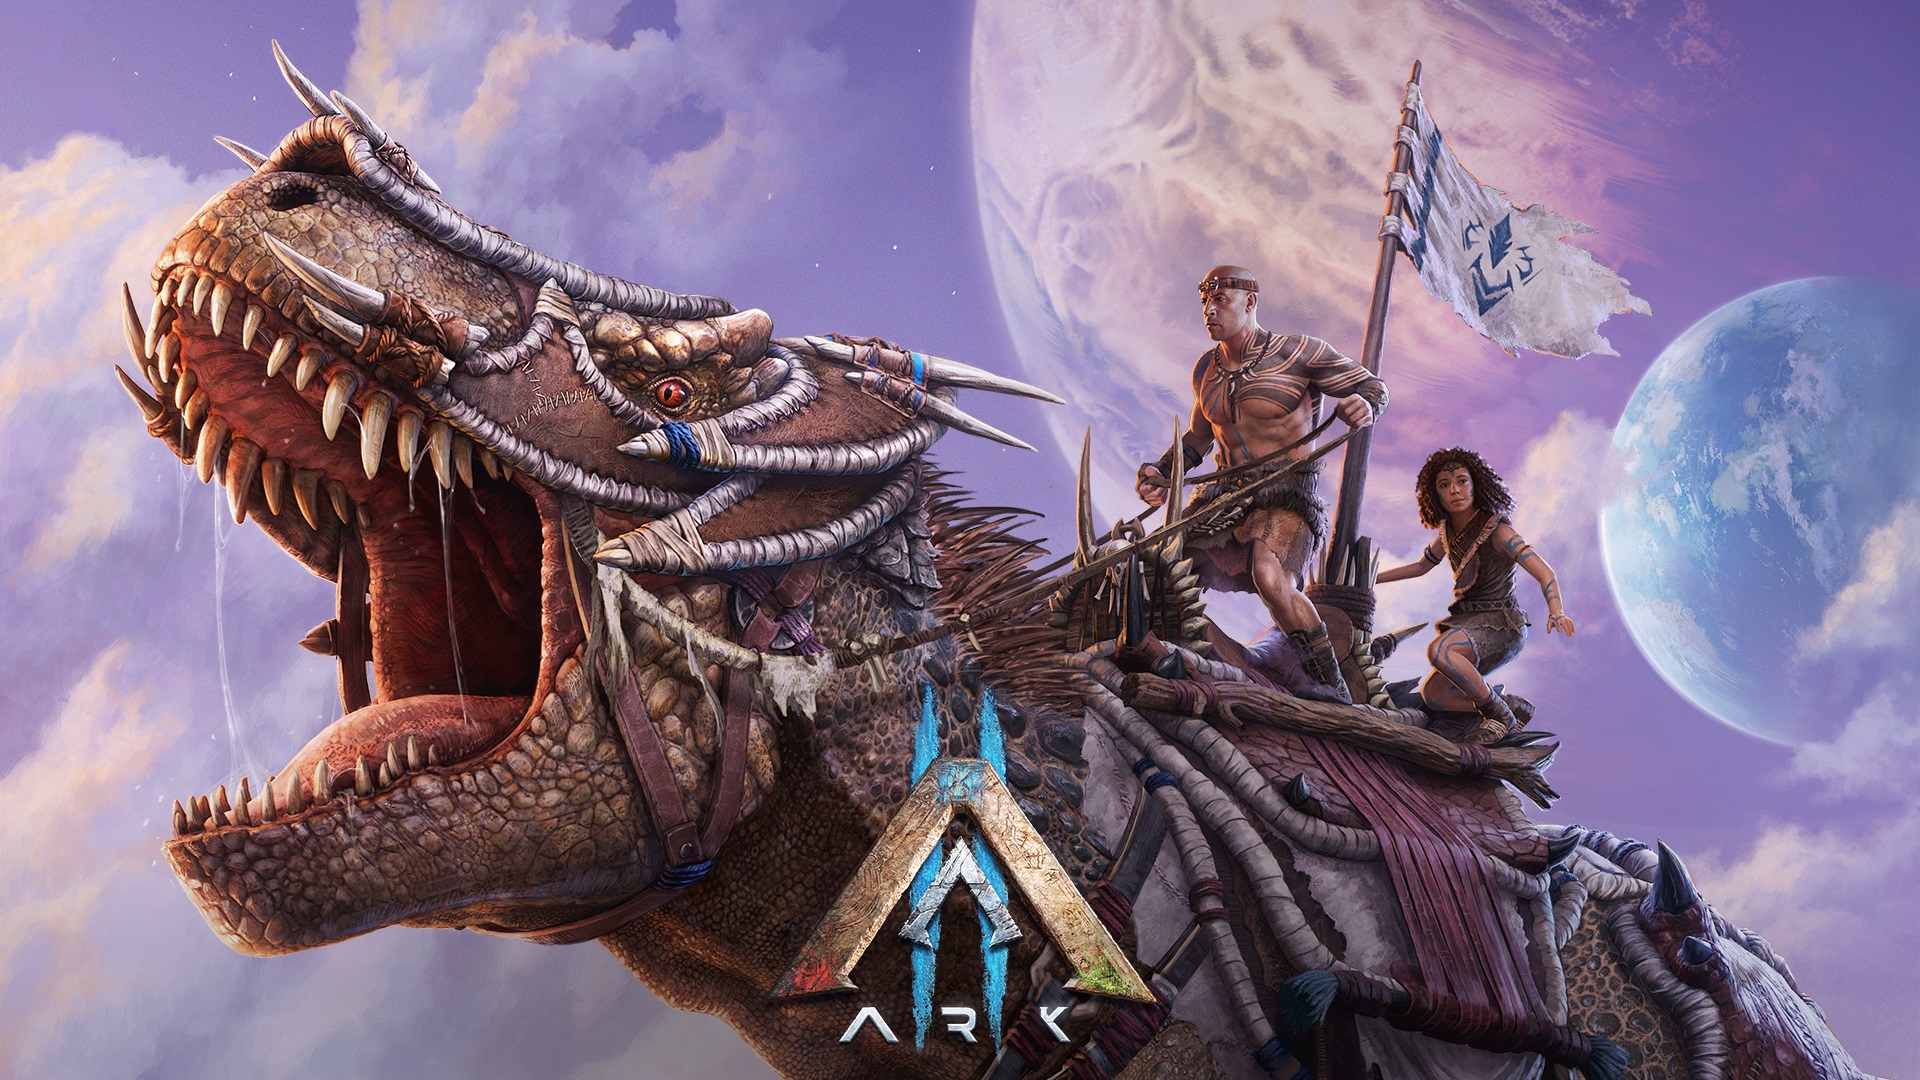 Ark II launches in 2023 for PC and Xbox Series X|S